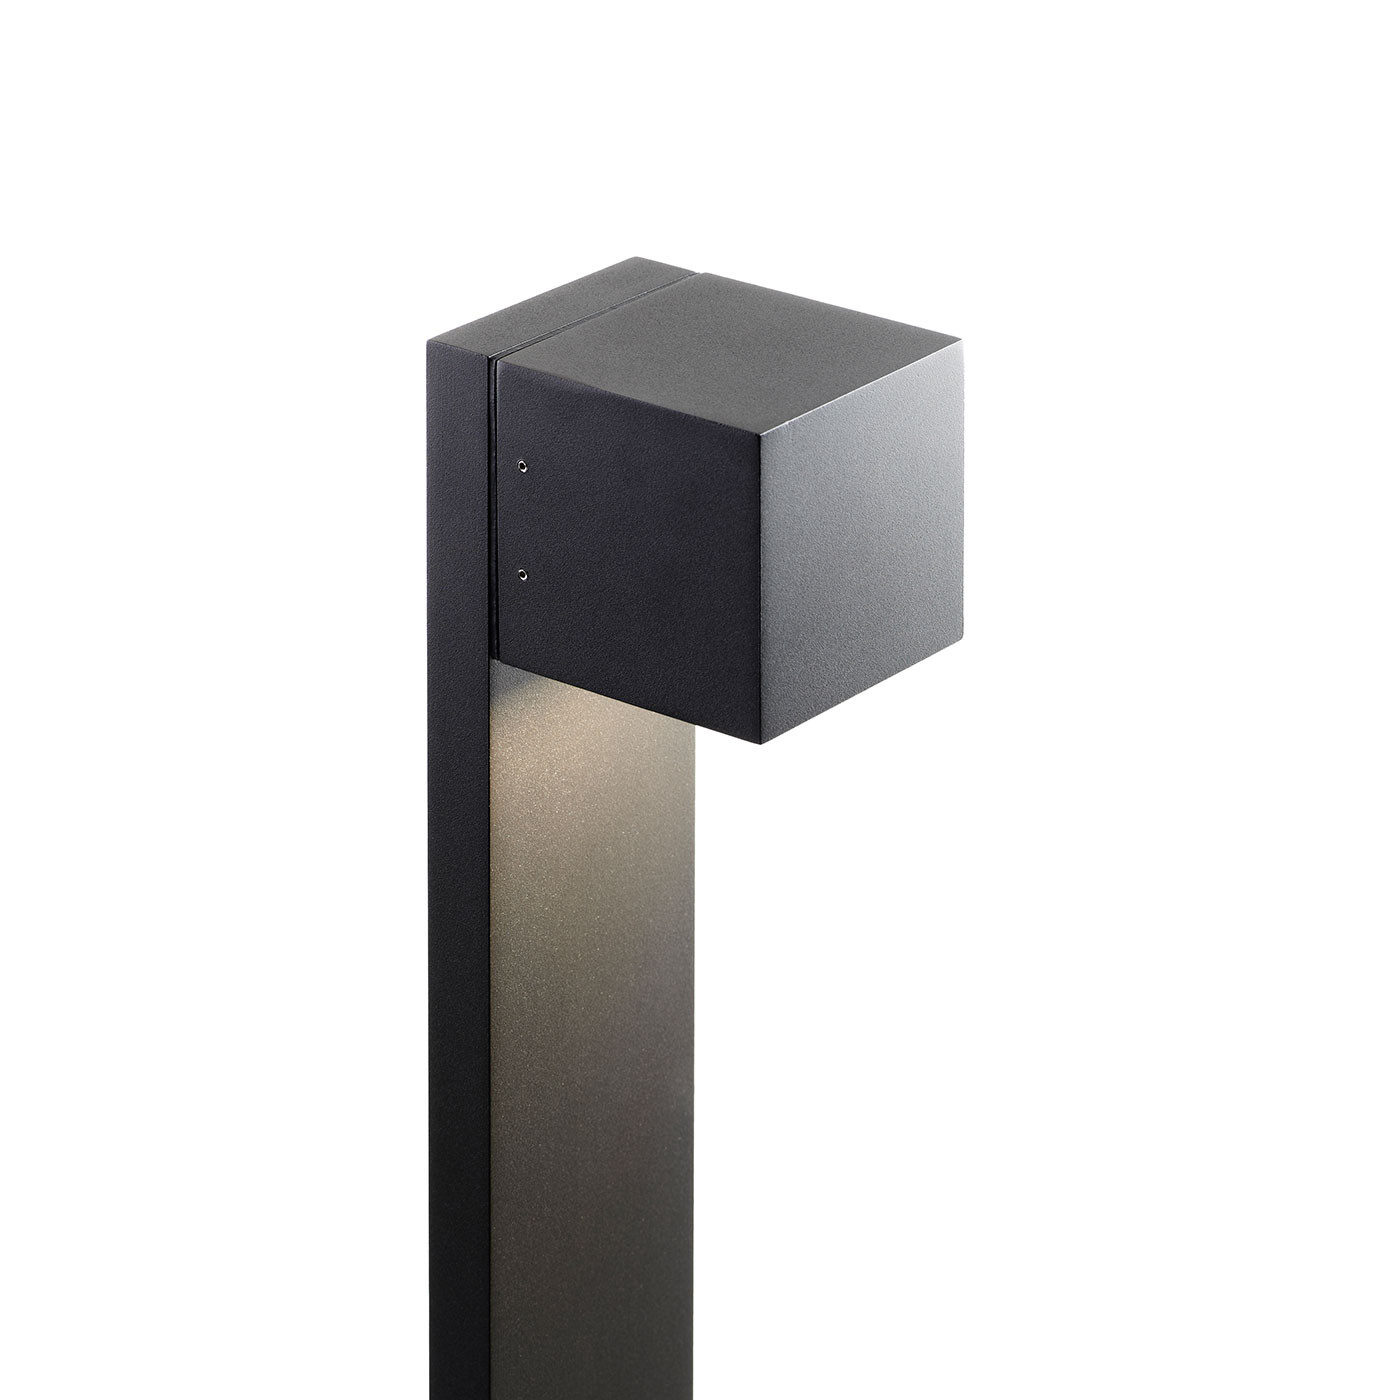 Arctic Staple Prøve Light-Point Cube XL LED with Spike at Nostraforma